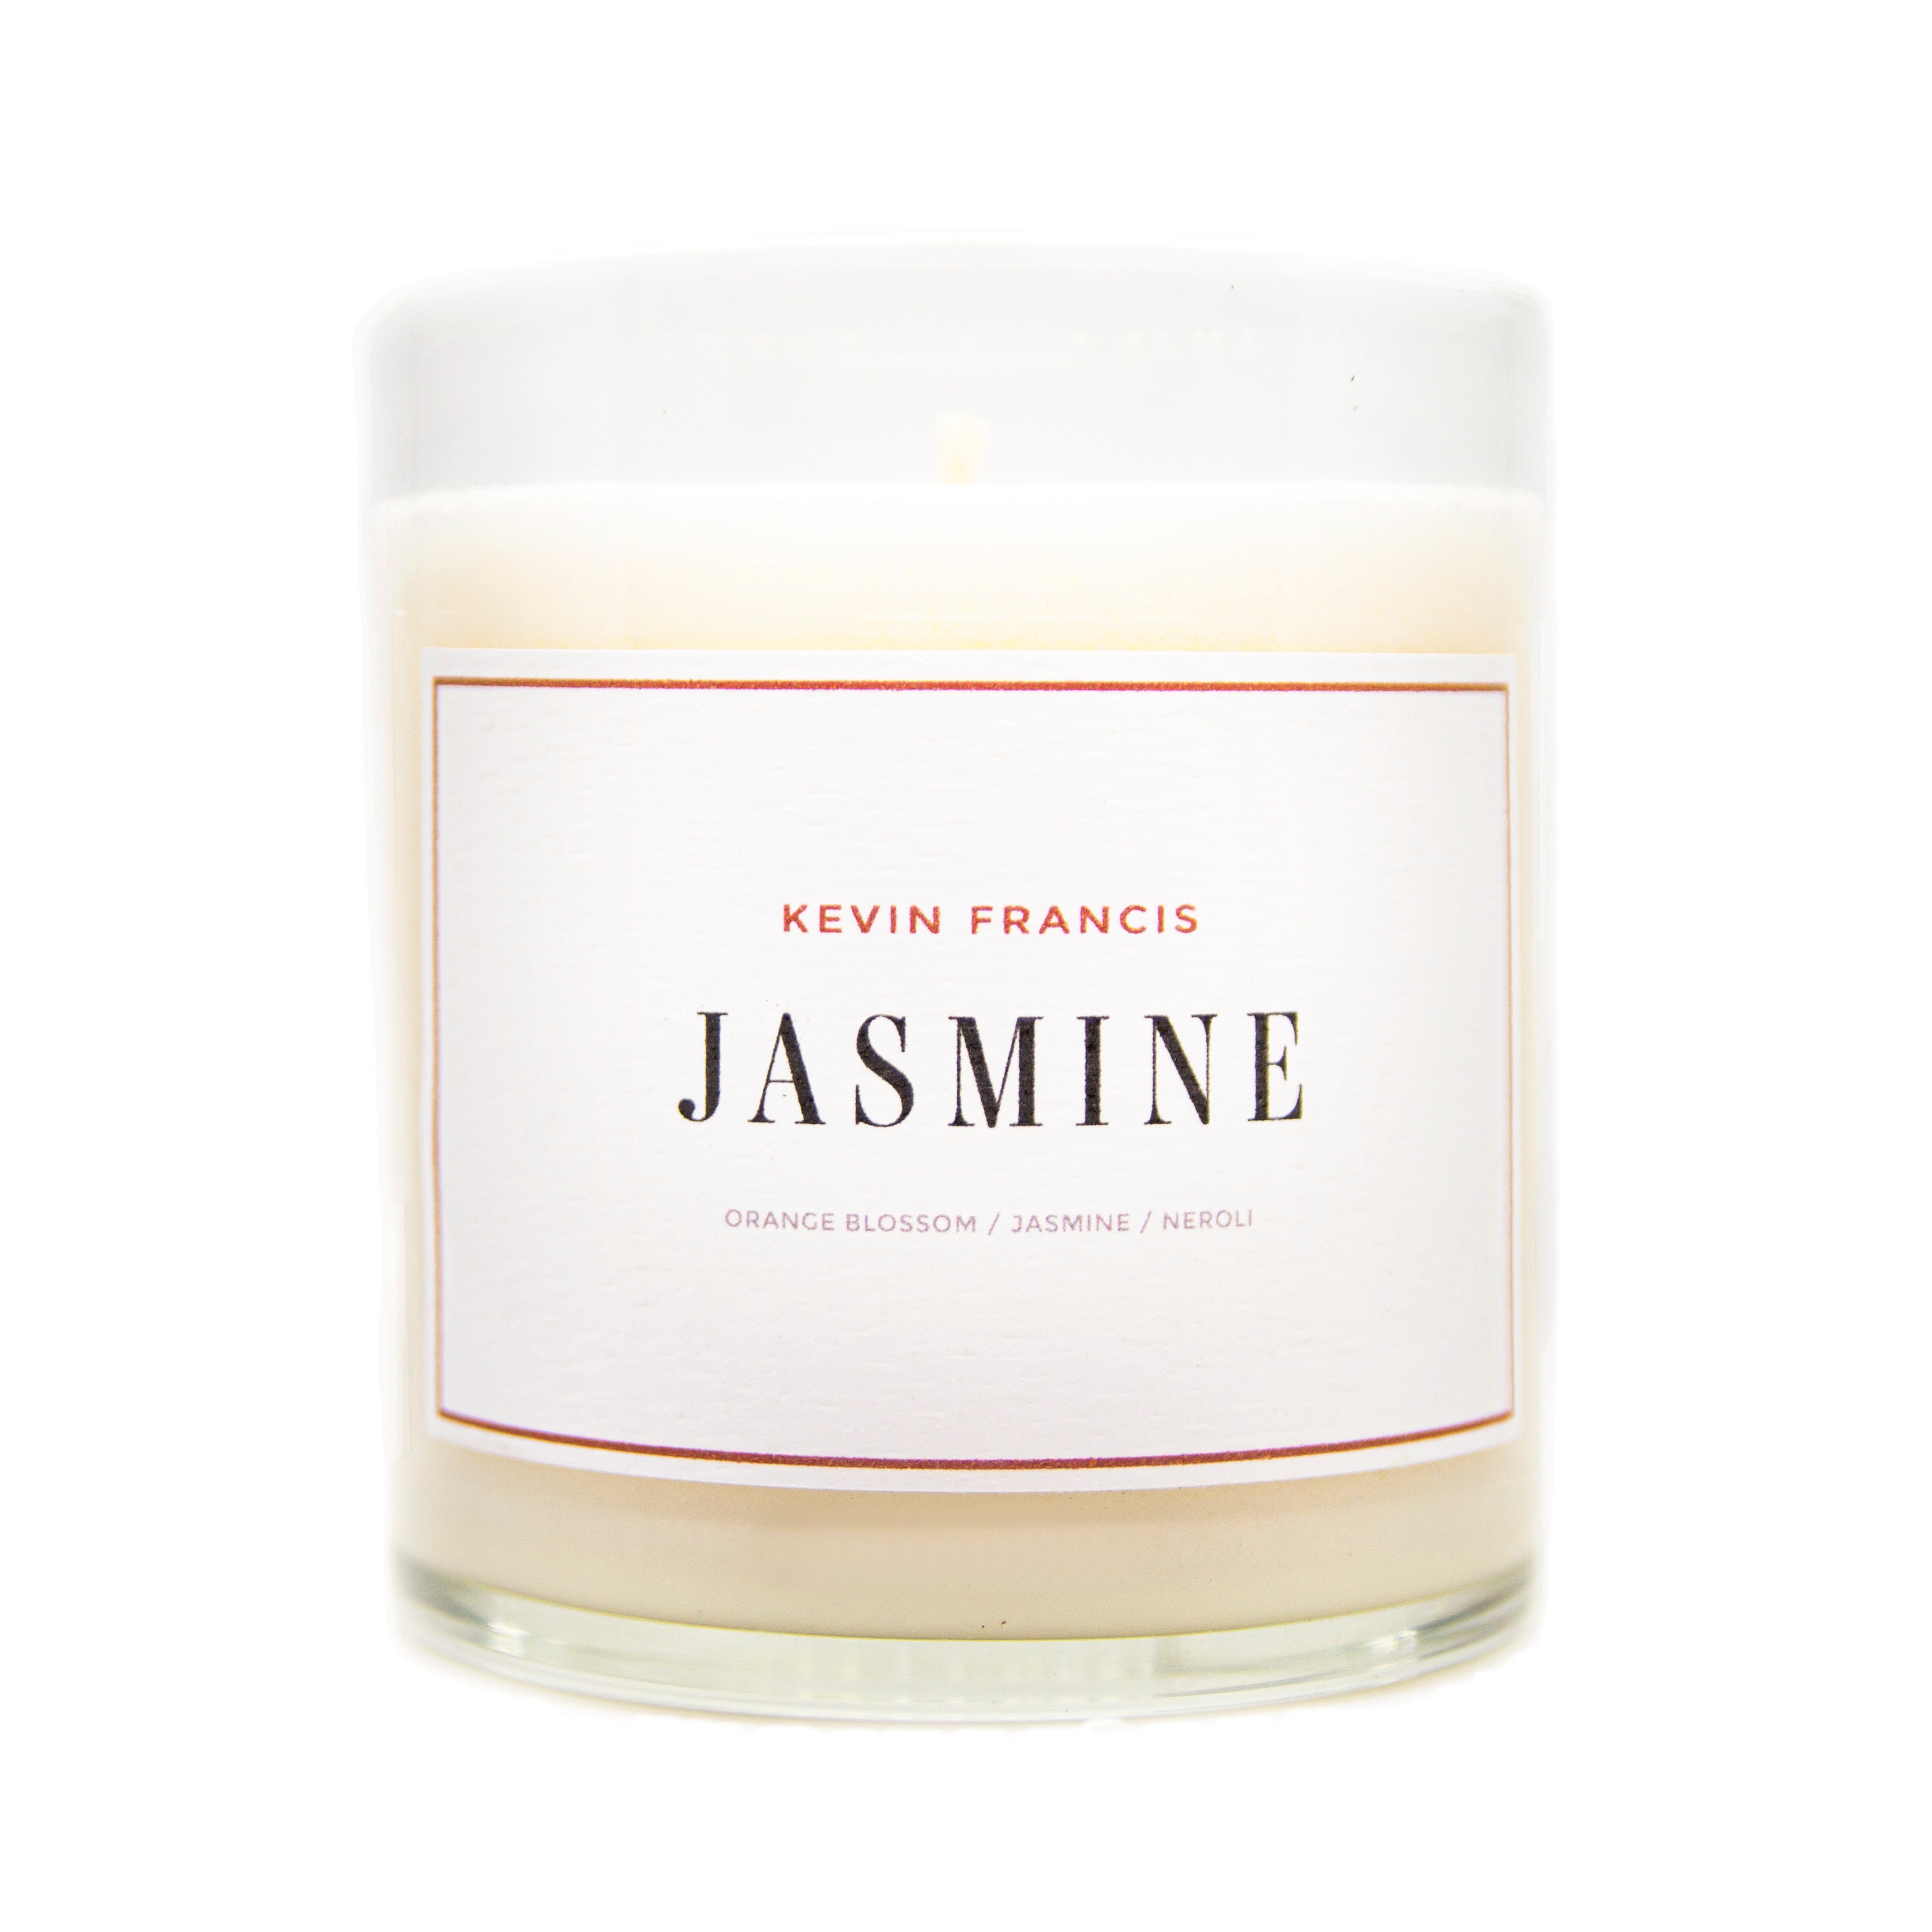 Jasmine Scented Luxury Candle by Kevin Francis Design | Luxury Home Decor